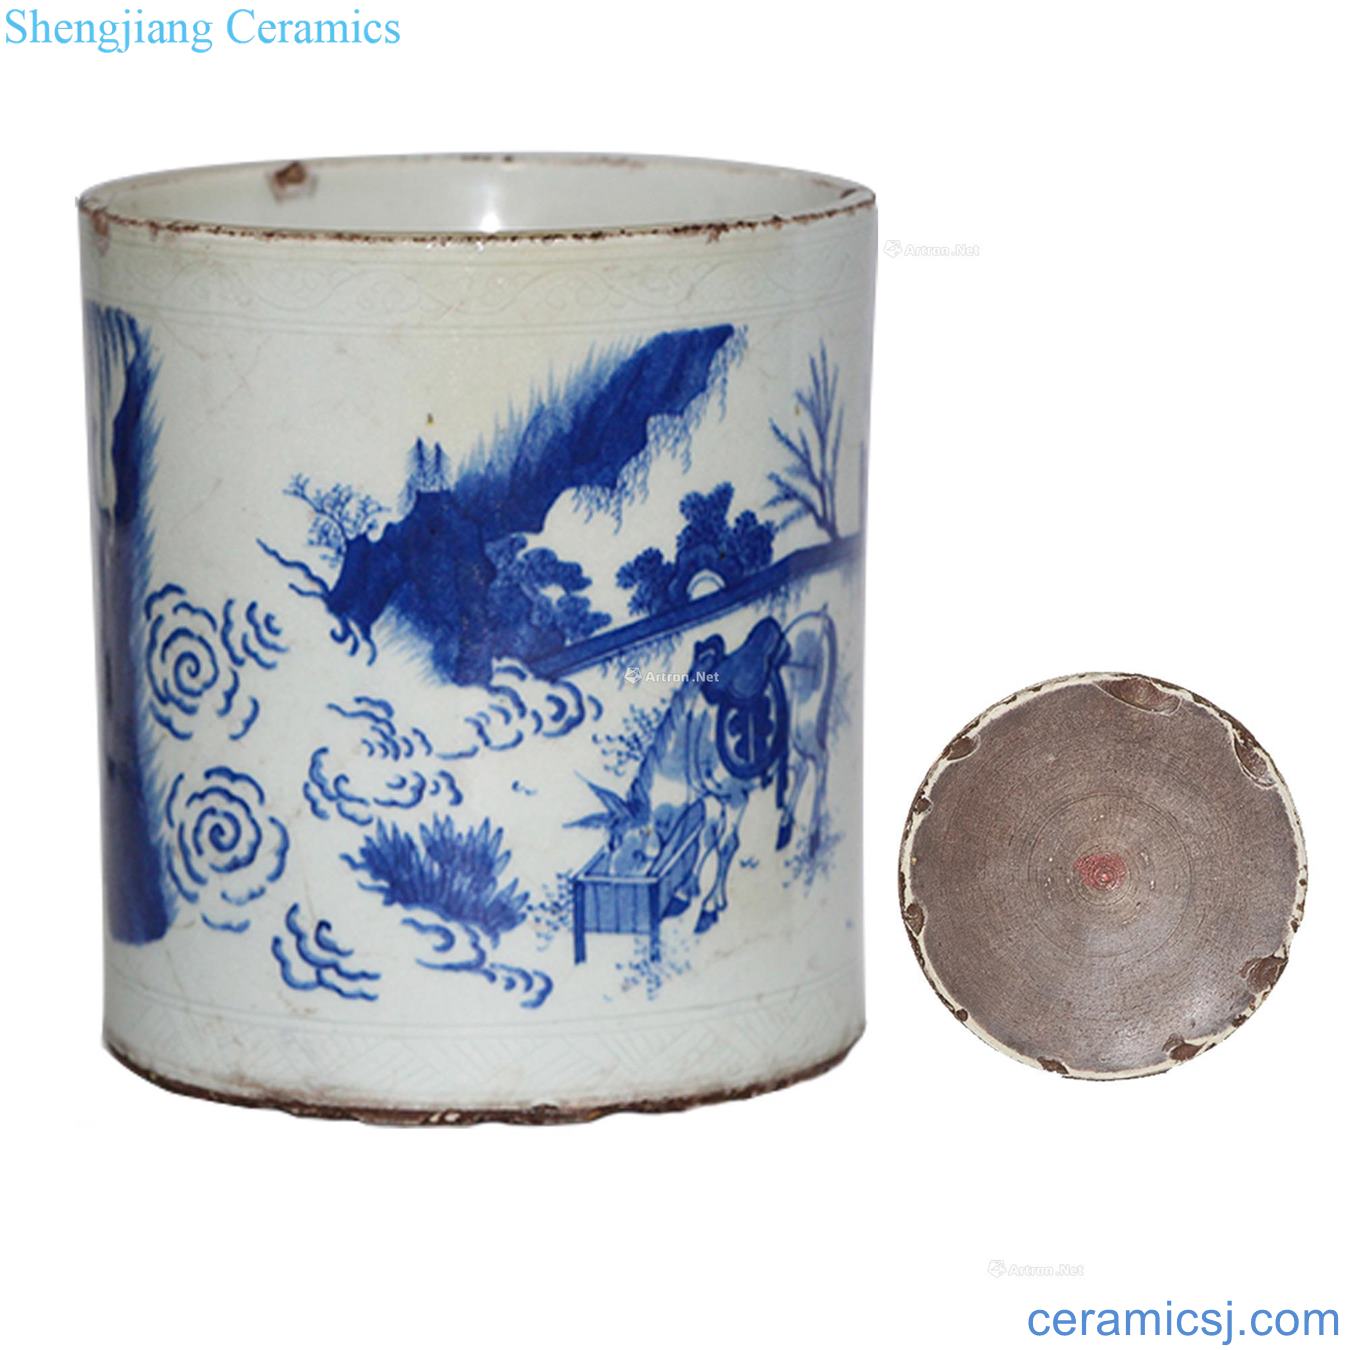 The stories of the Ming dynasty blue and white pen container